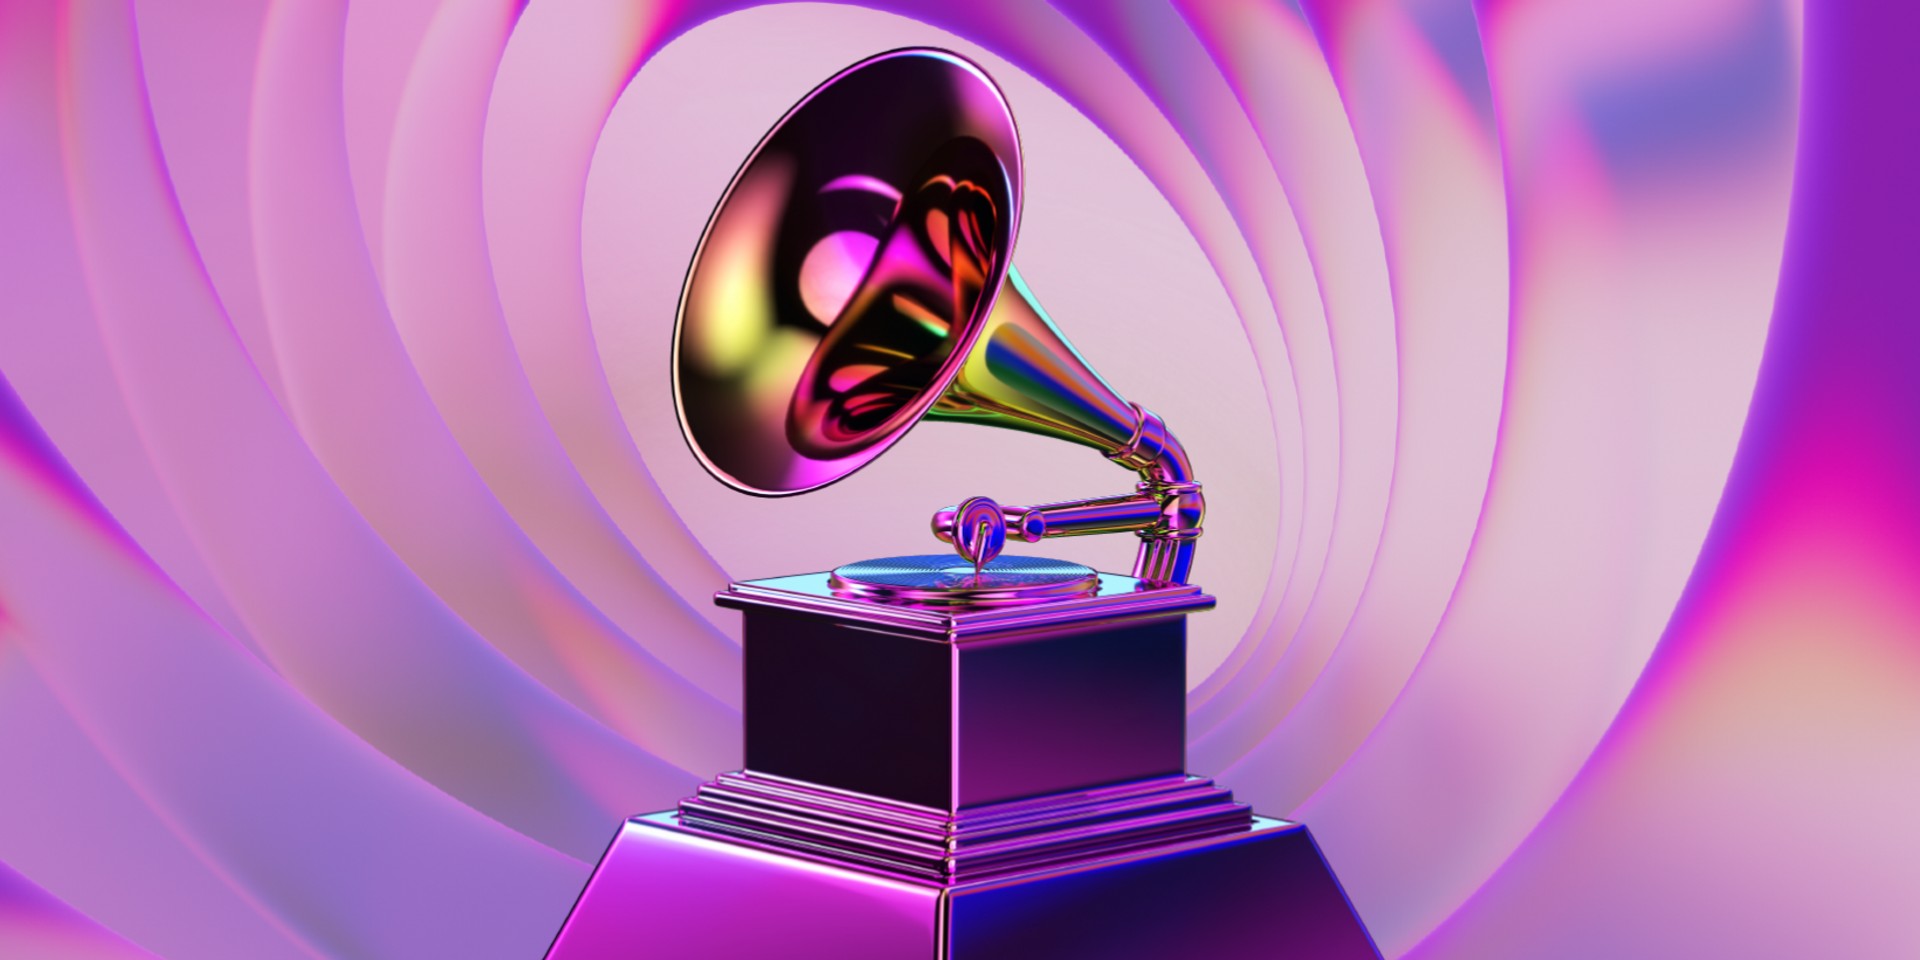 "Holding the show on January 31st simply contains too many risks" The GRAMMY Awards postpones 2022 edition